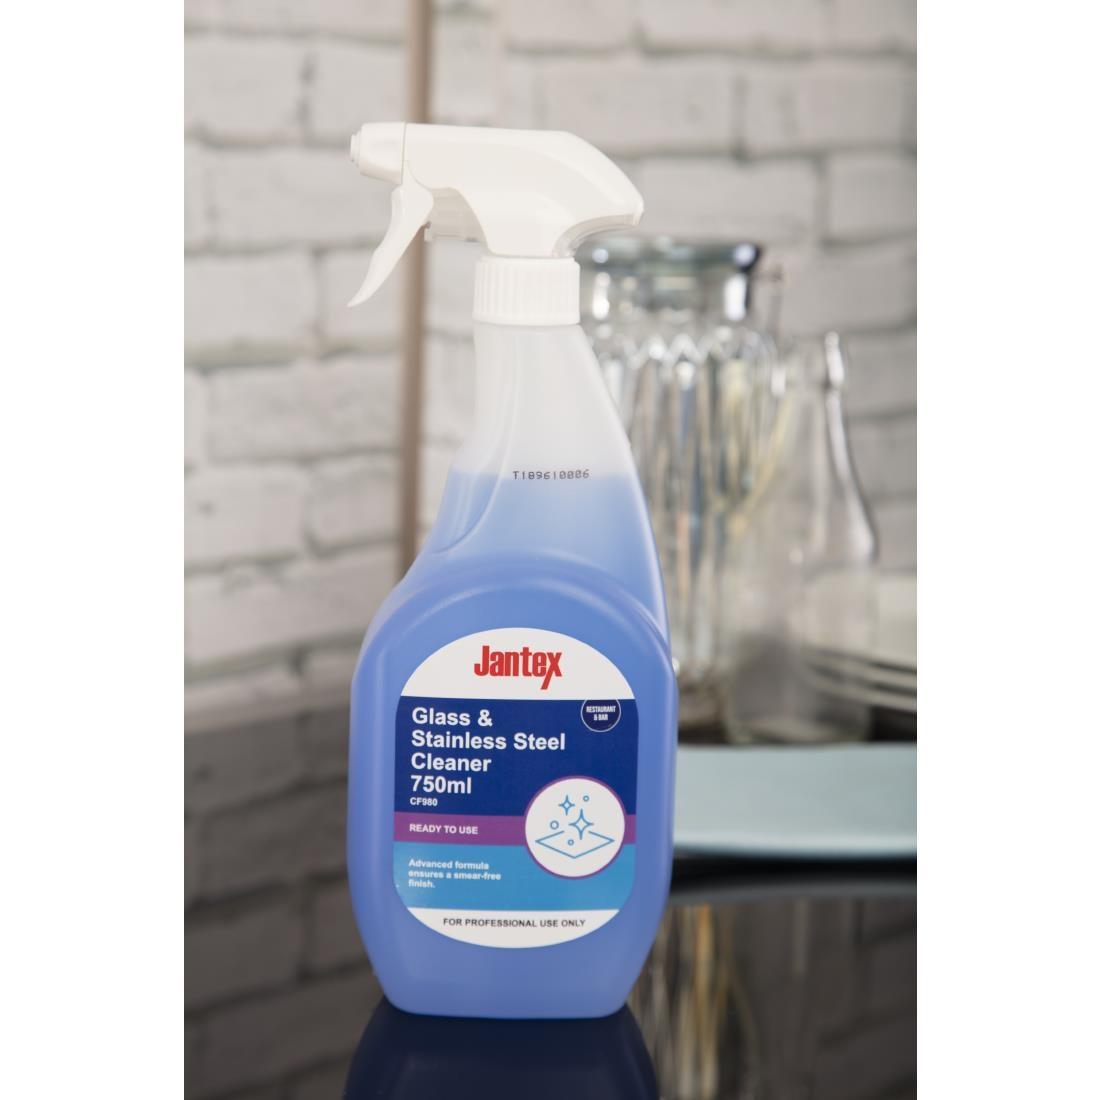 Jantex Glass and Stainless Steel Cleaner Ready To Use 750ml - CF980  - 5